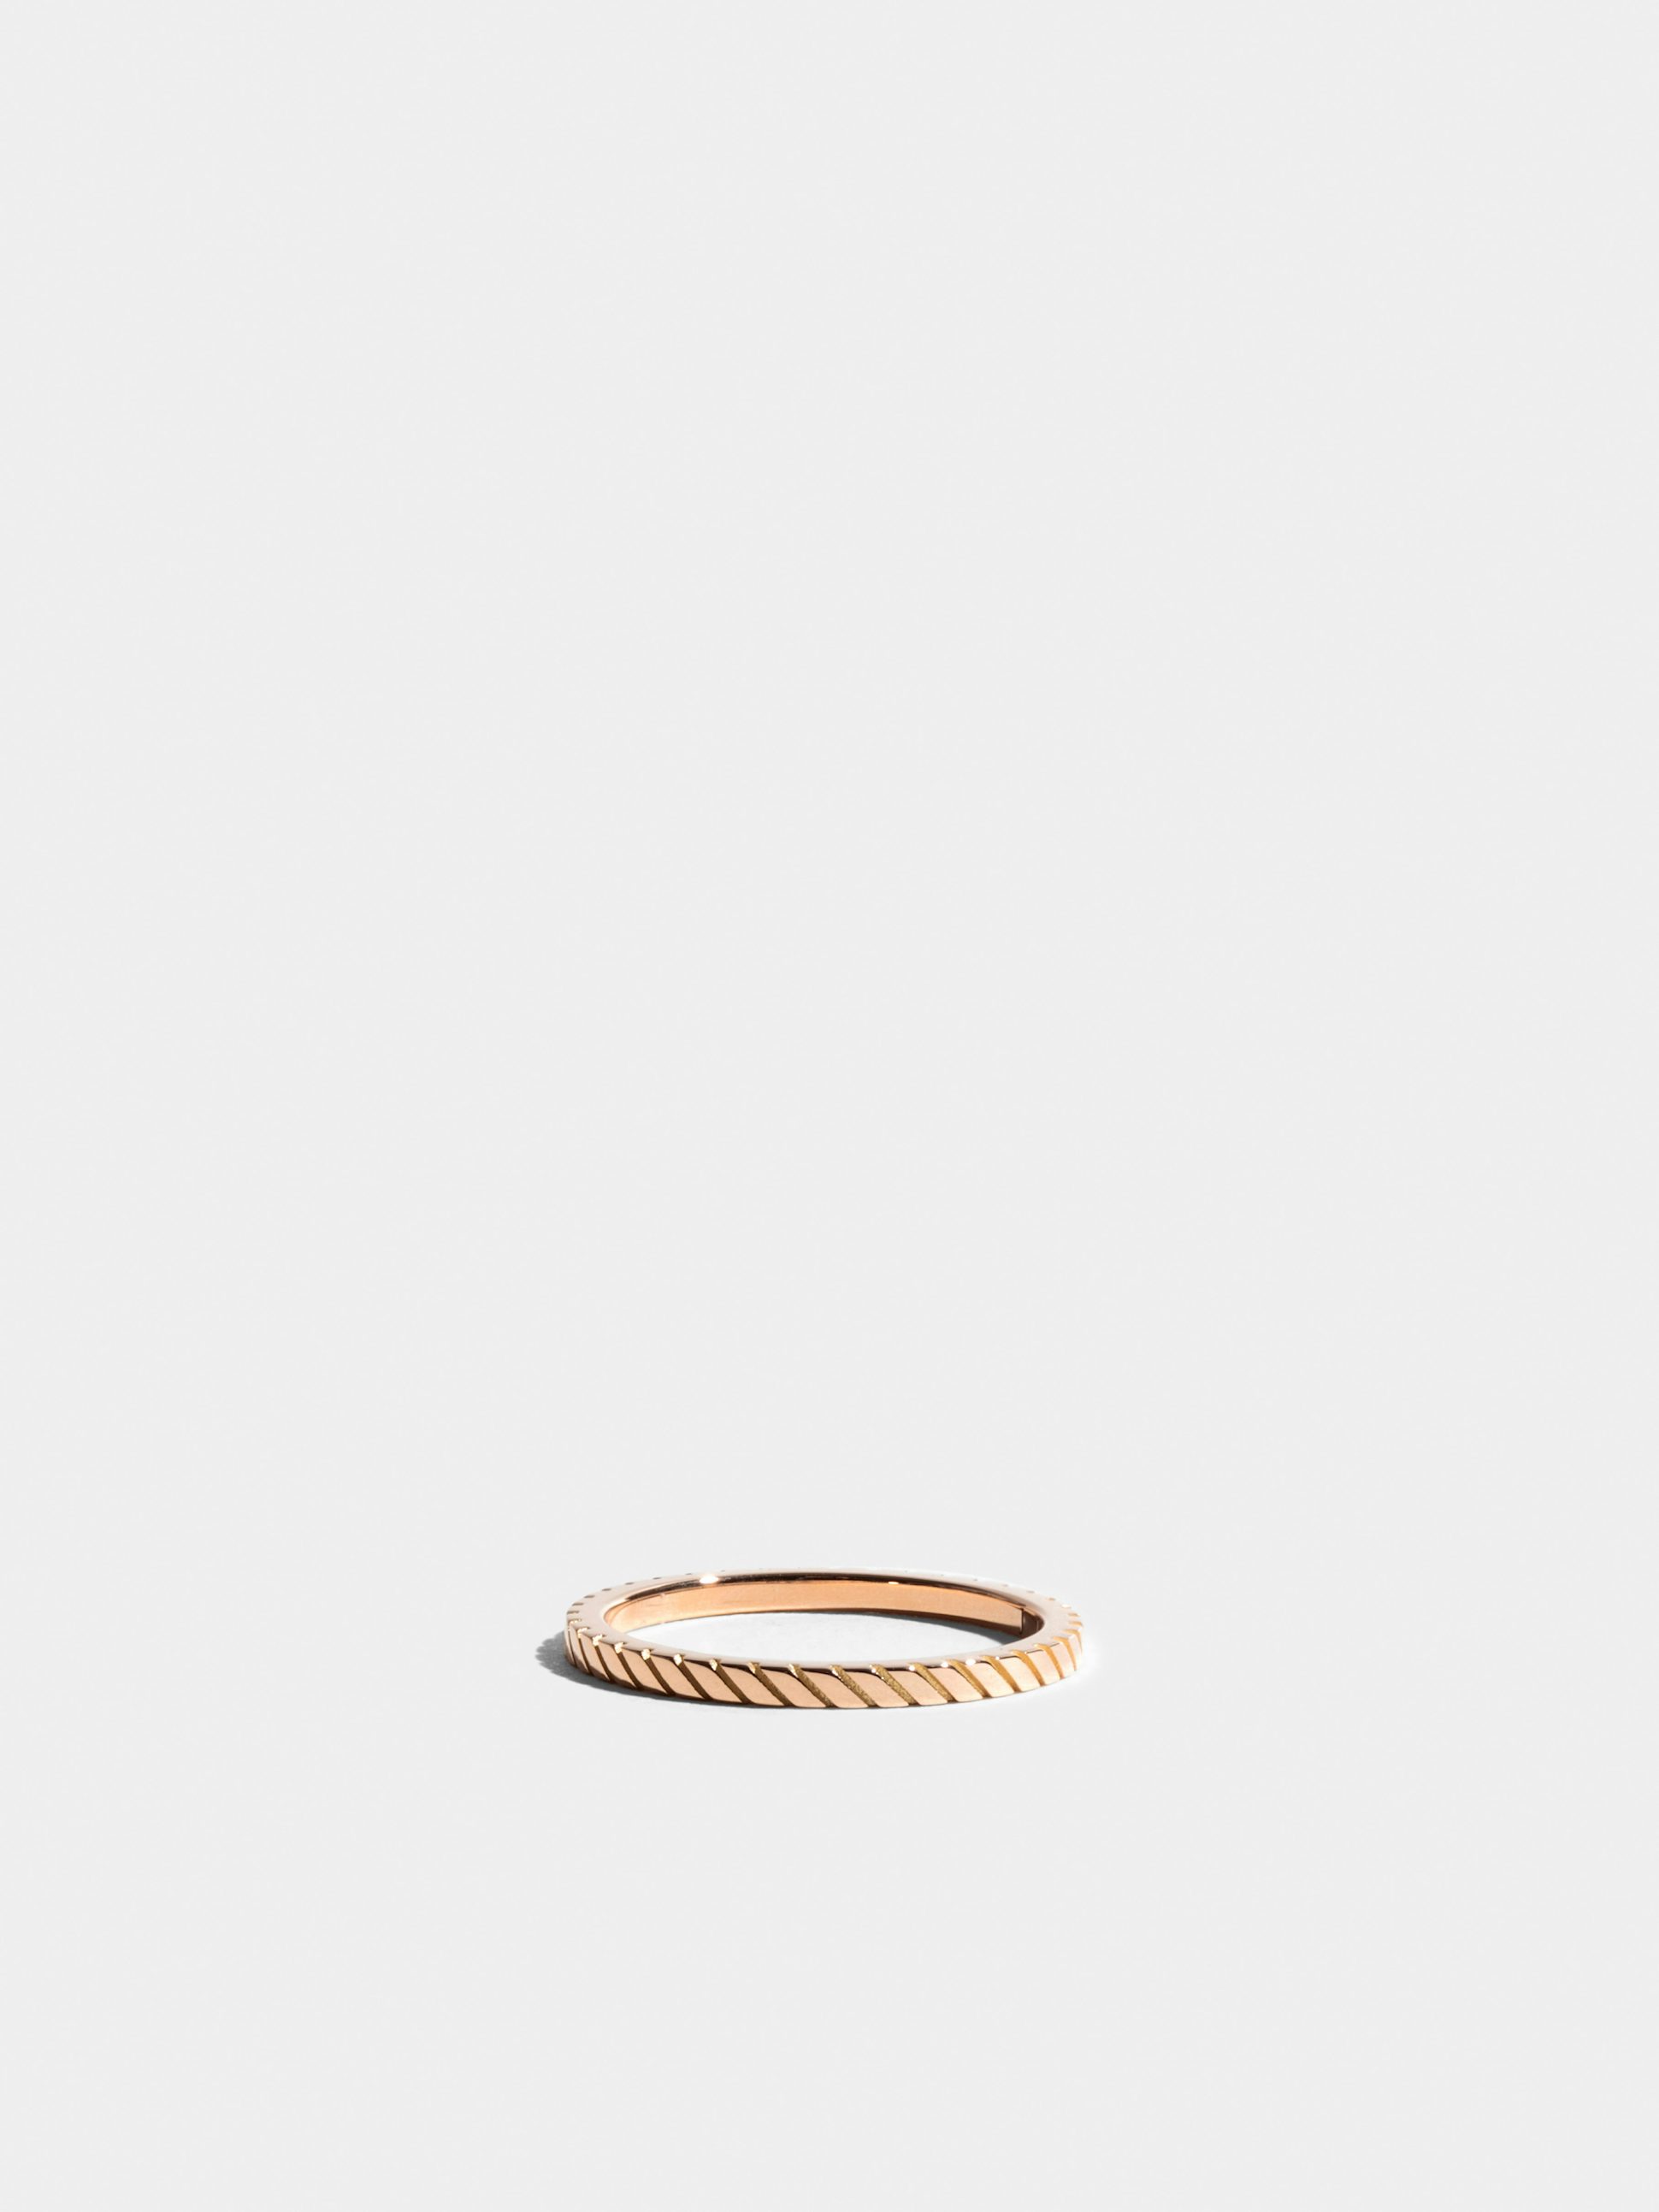 Anagramme grooved ring in 18k Fairmined ethical rose gold